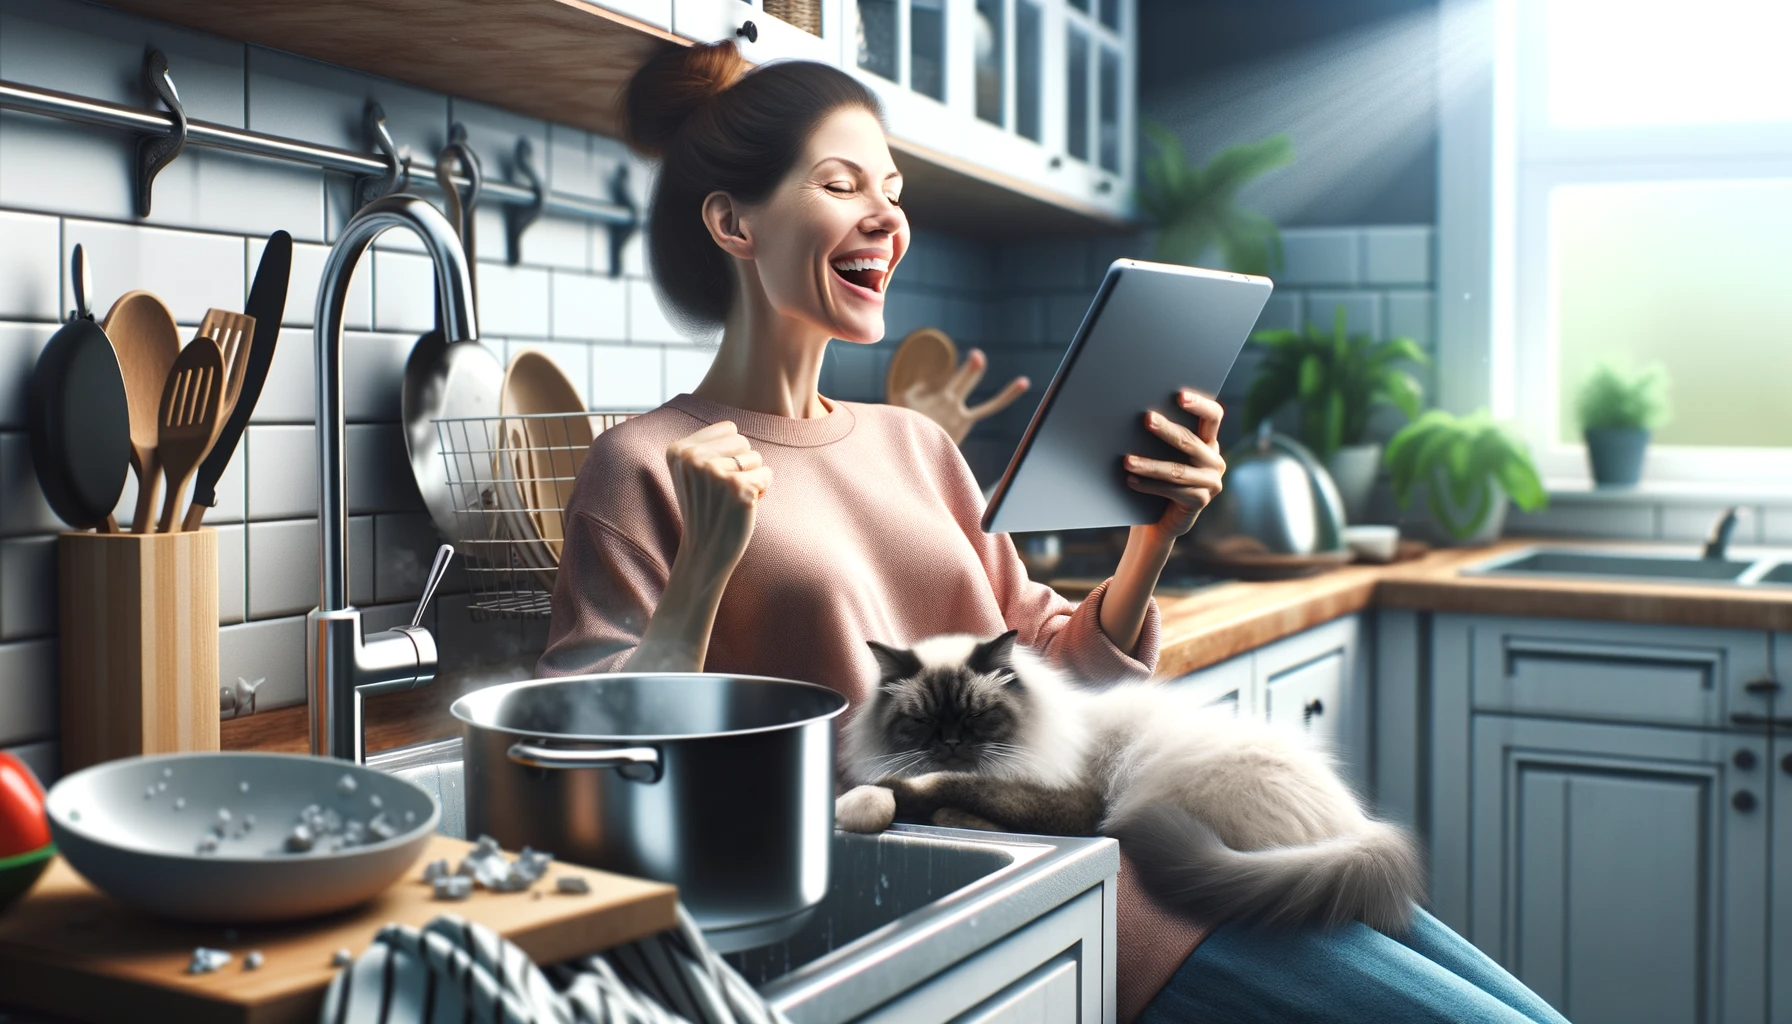 Realistic image of a kitchen setting. A woman, radiating happiness from her recent game win, plays on her iPad with a cat curled up in her lap. The kitchen ambiance contrasts her joy, with neglected dishes in the sink and a pot emitting steam, indicating it's about to boil over.